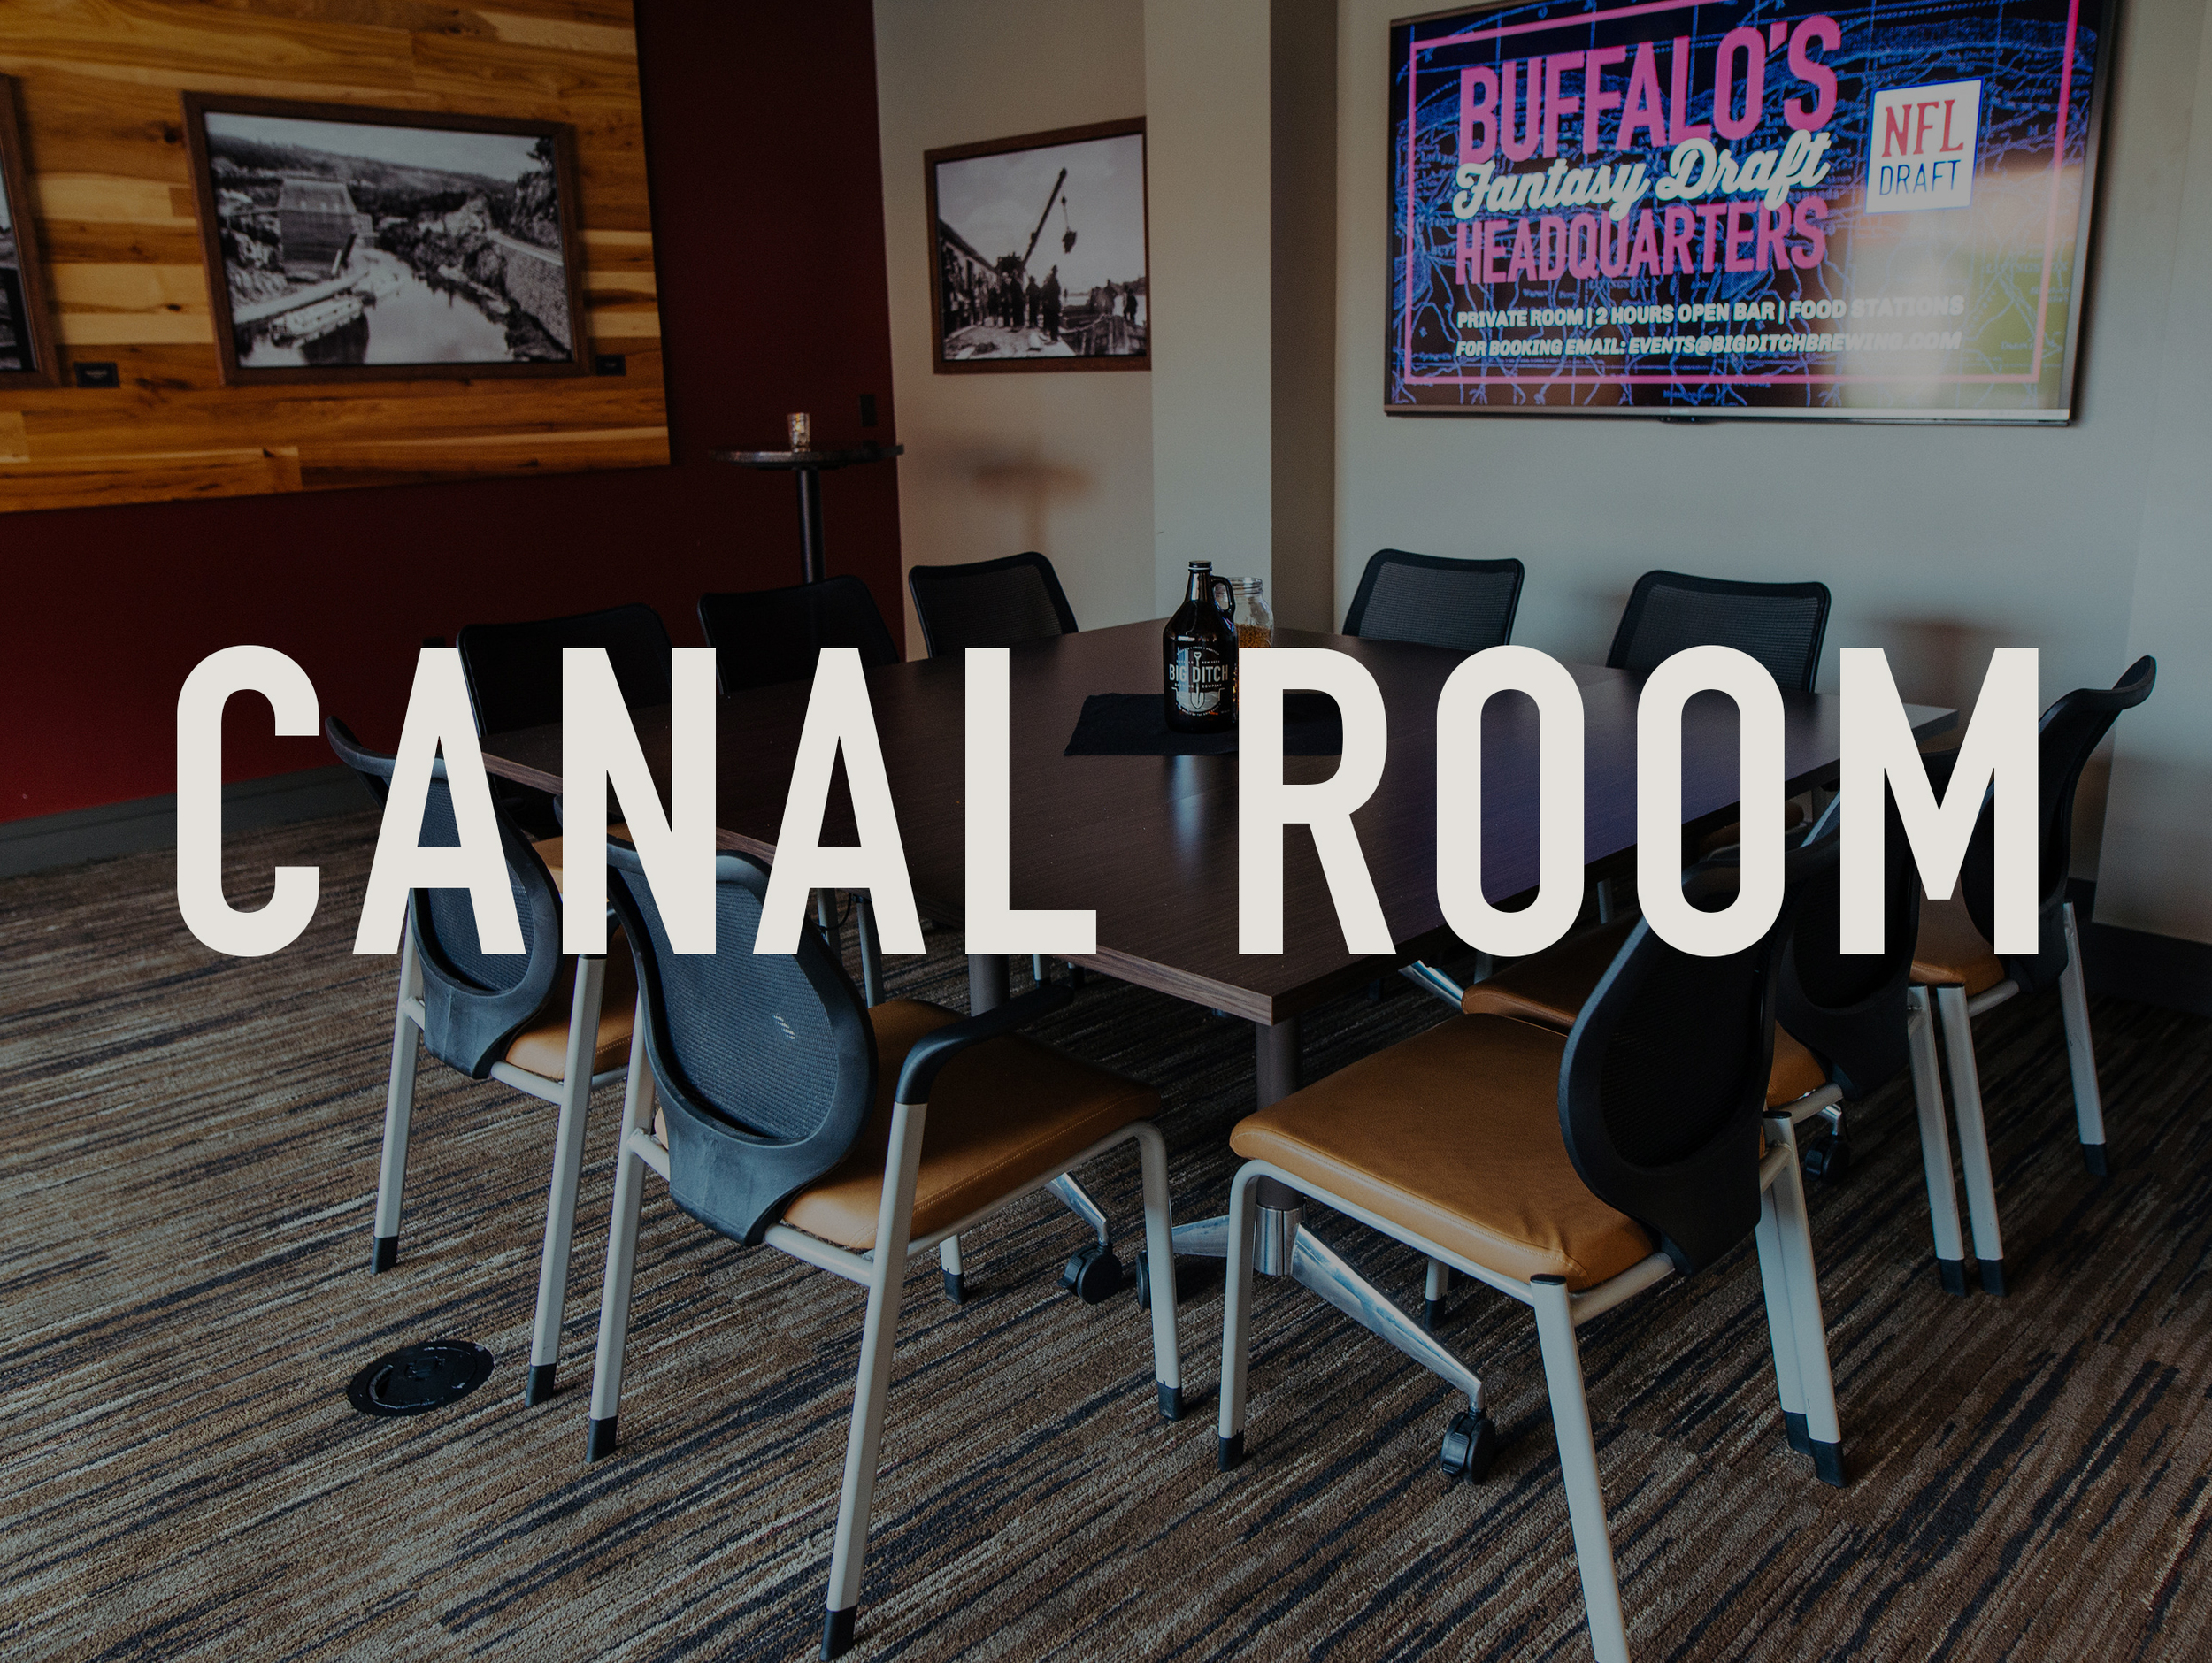 Canal Room